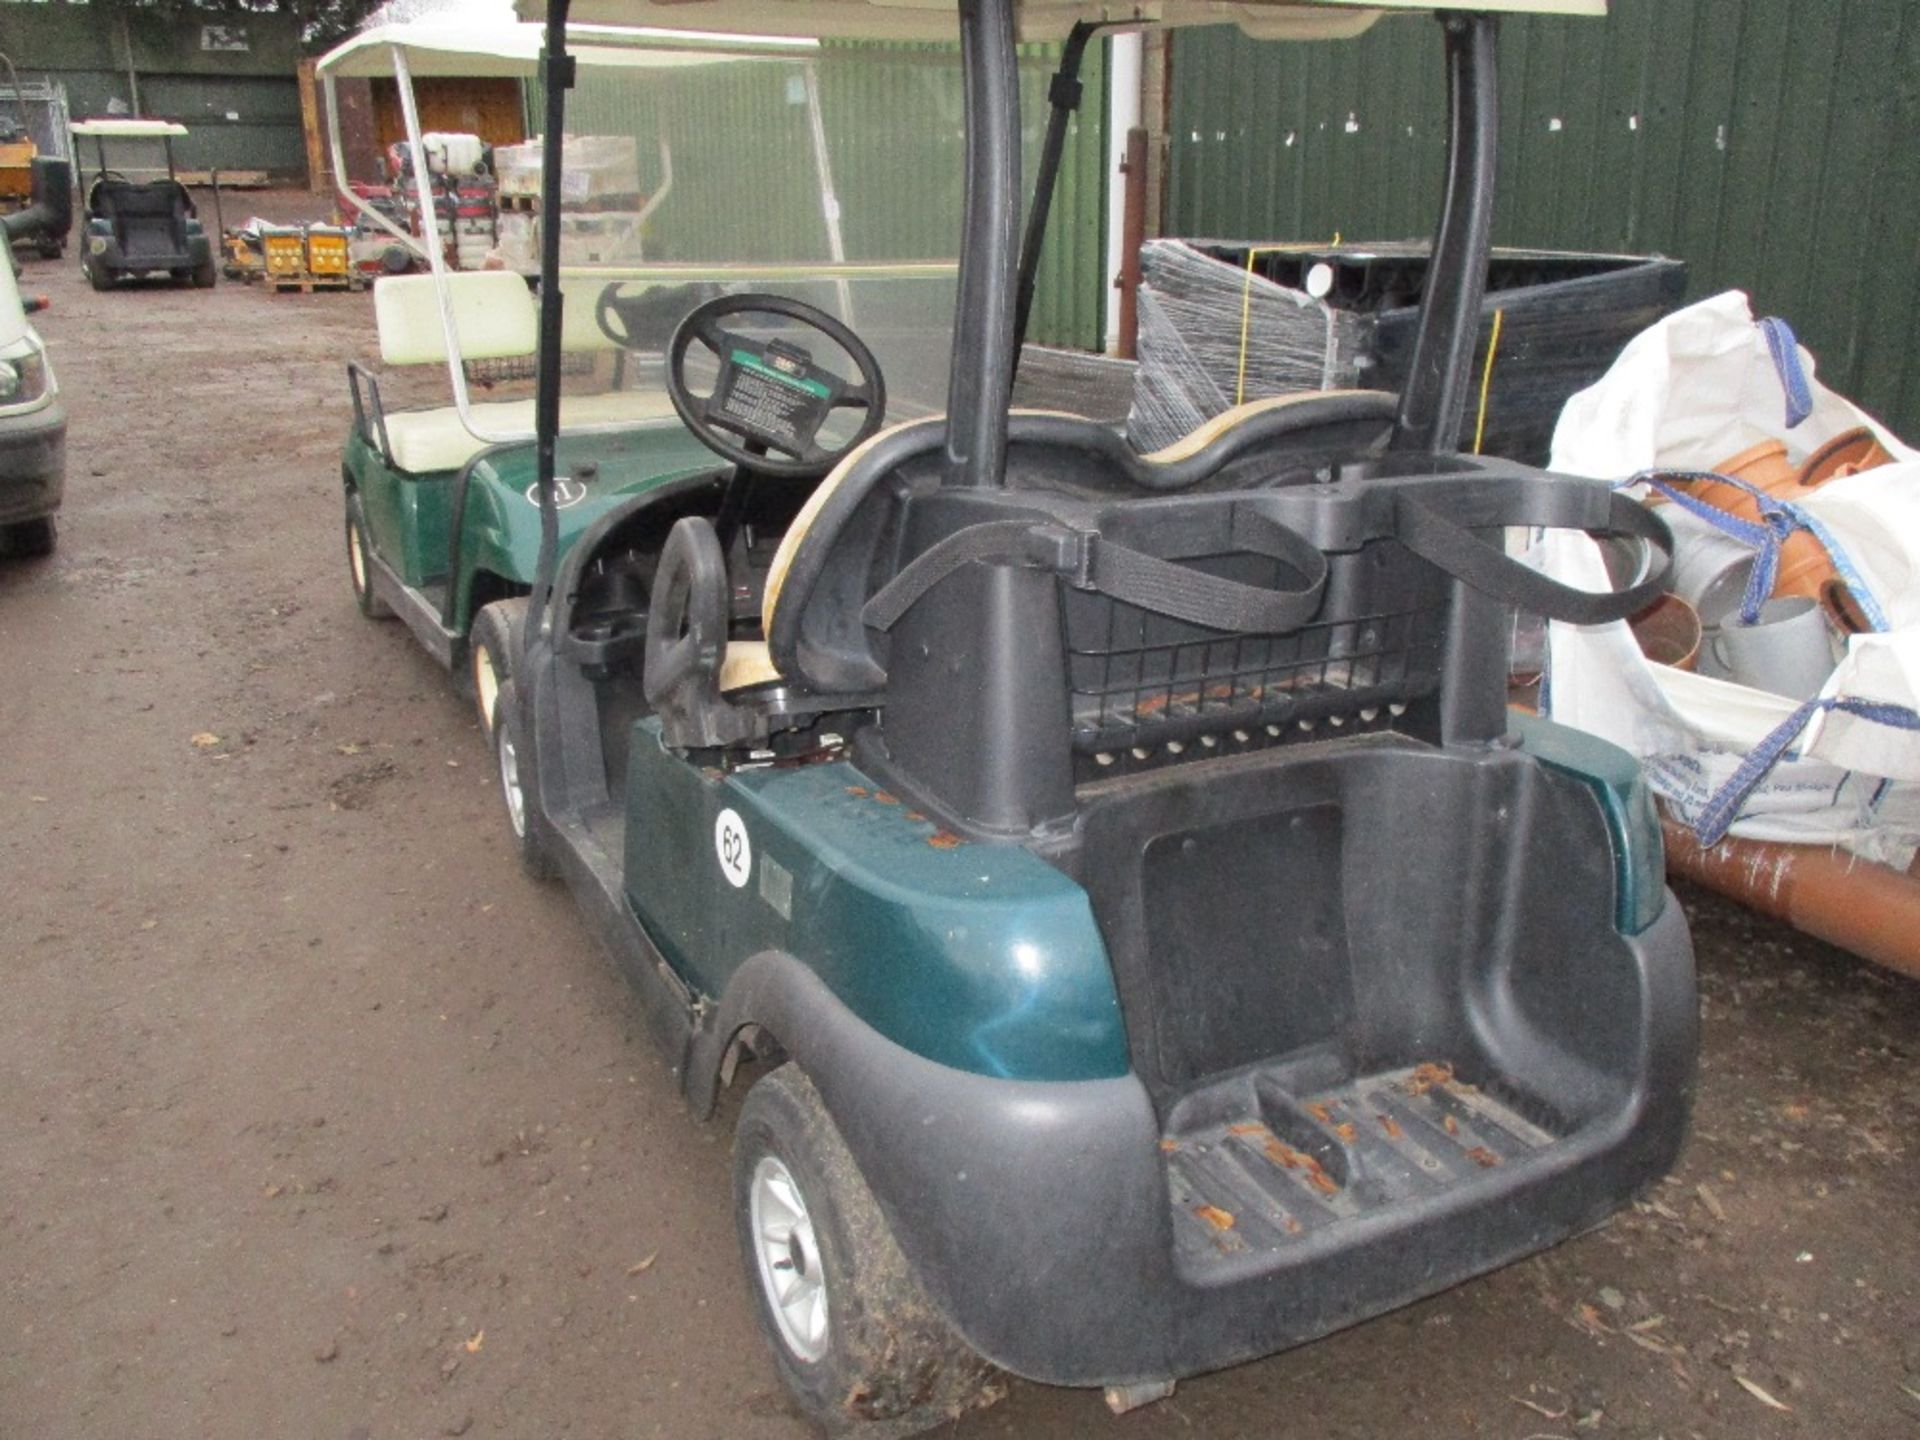 Clubcar electric golf buggy - Image 4 of 4